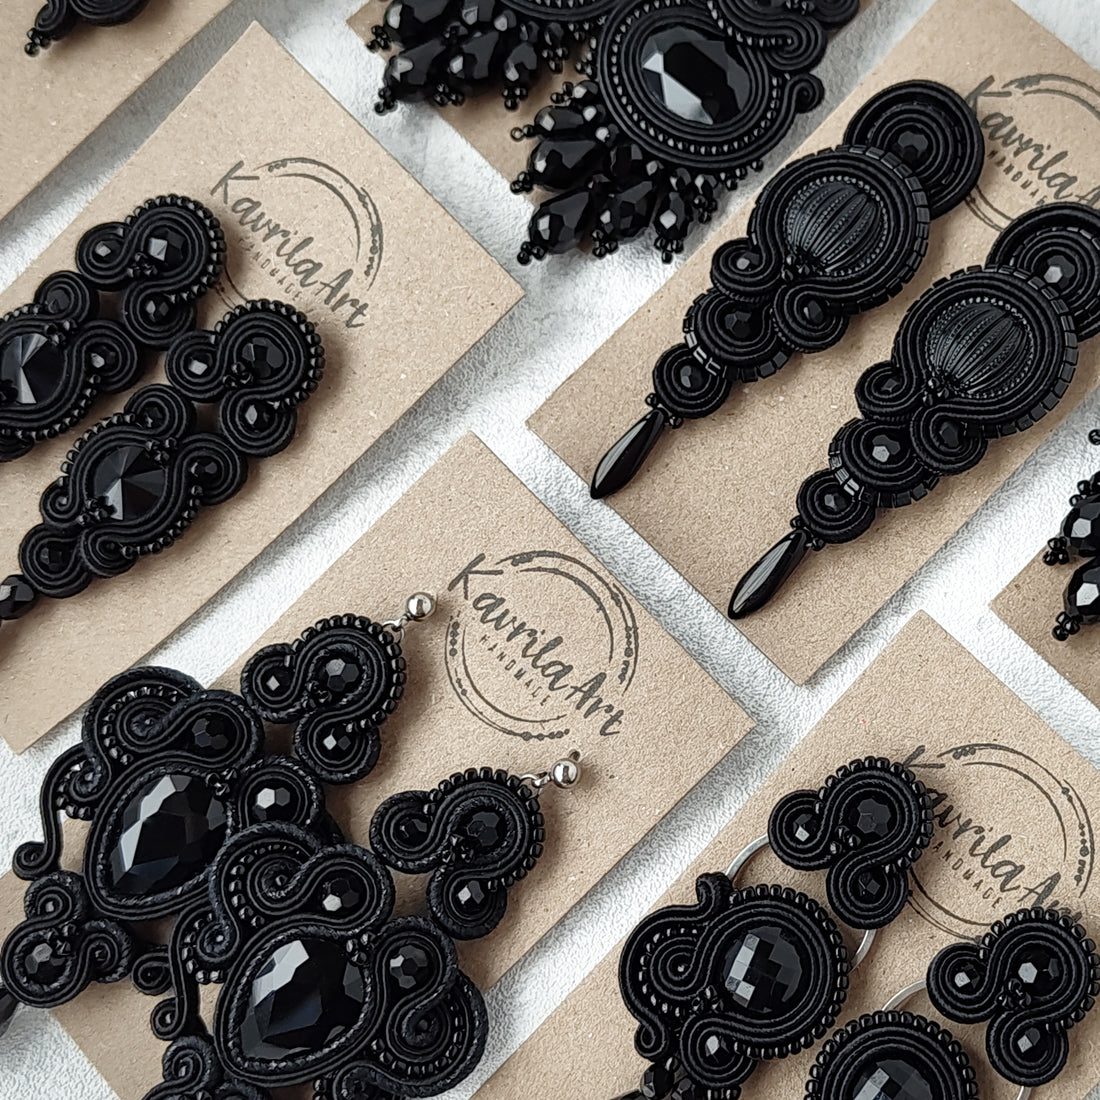 About soutache jewelry…